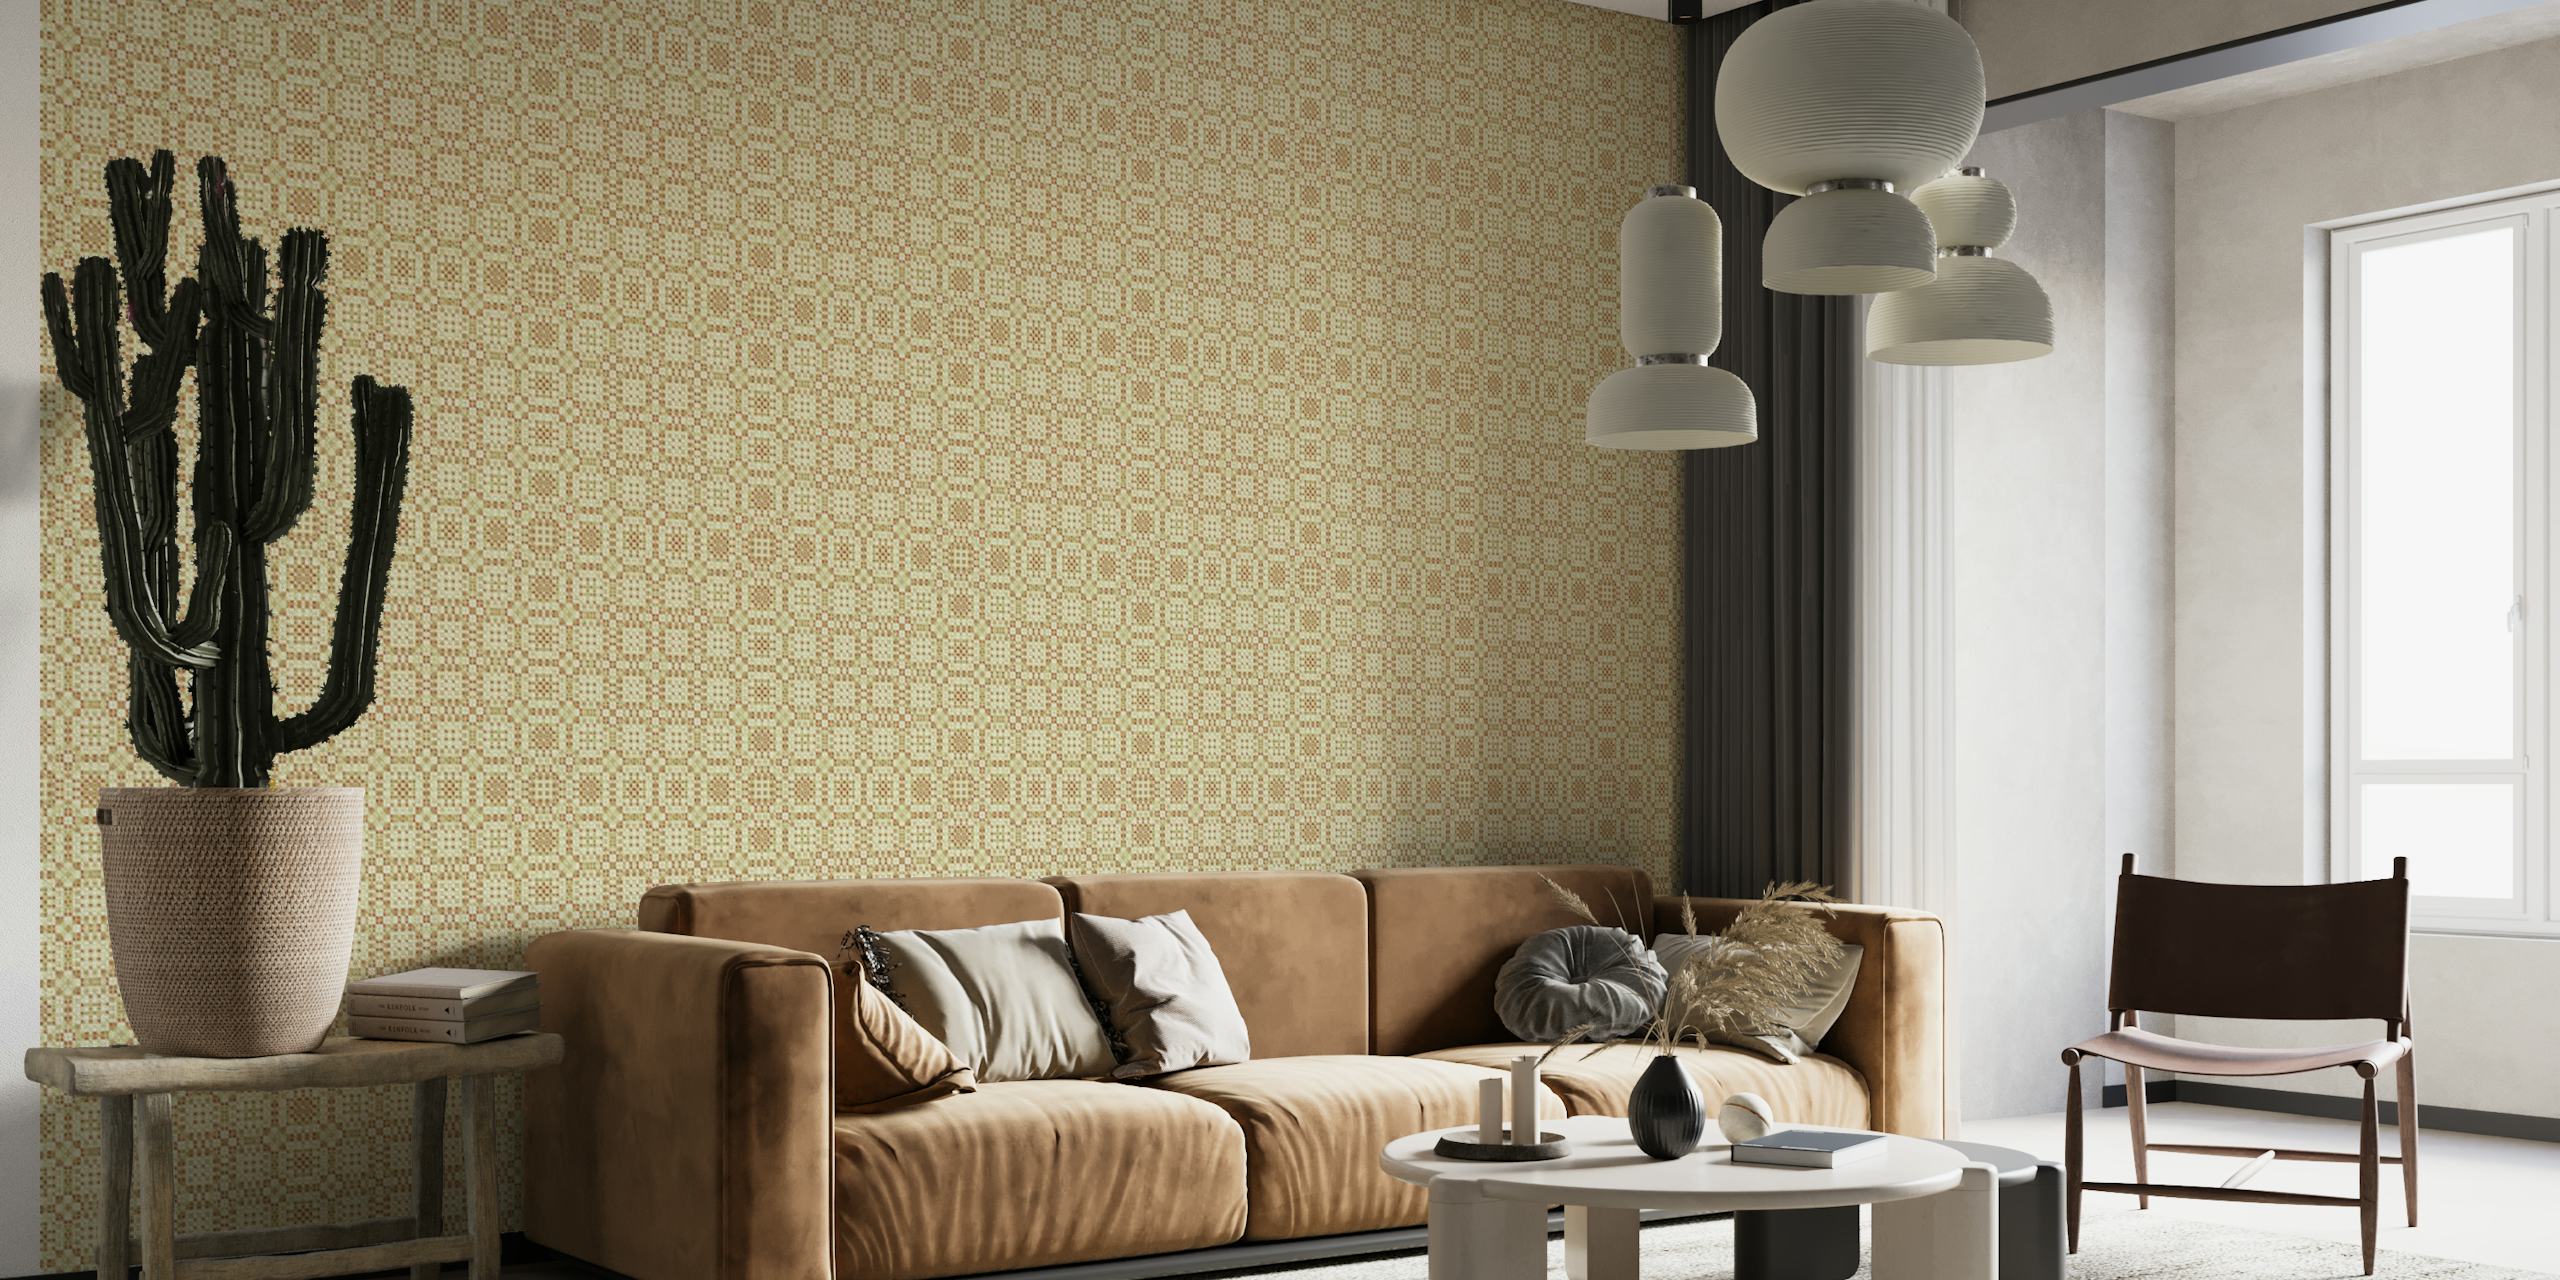 Arabesque Tiles Gold Tone wall mural with intricate patterns and golden hues